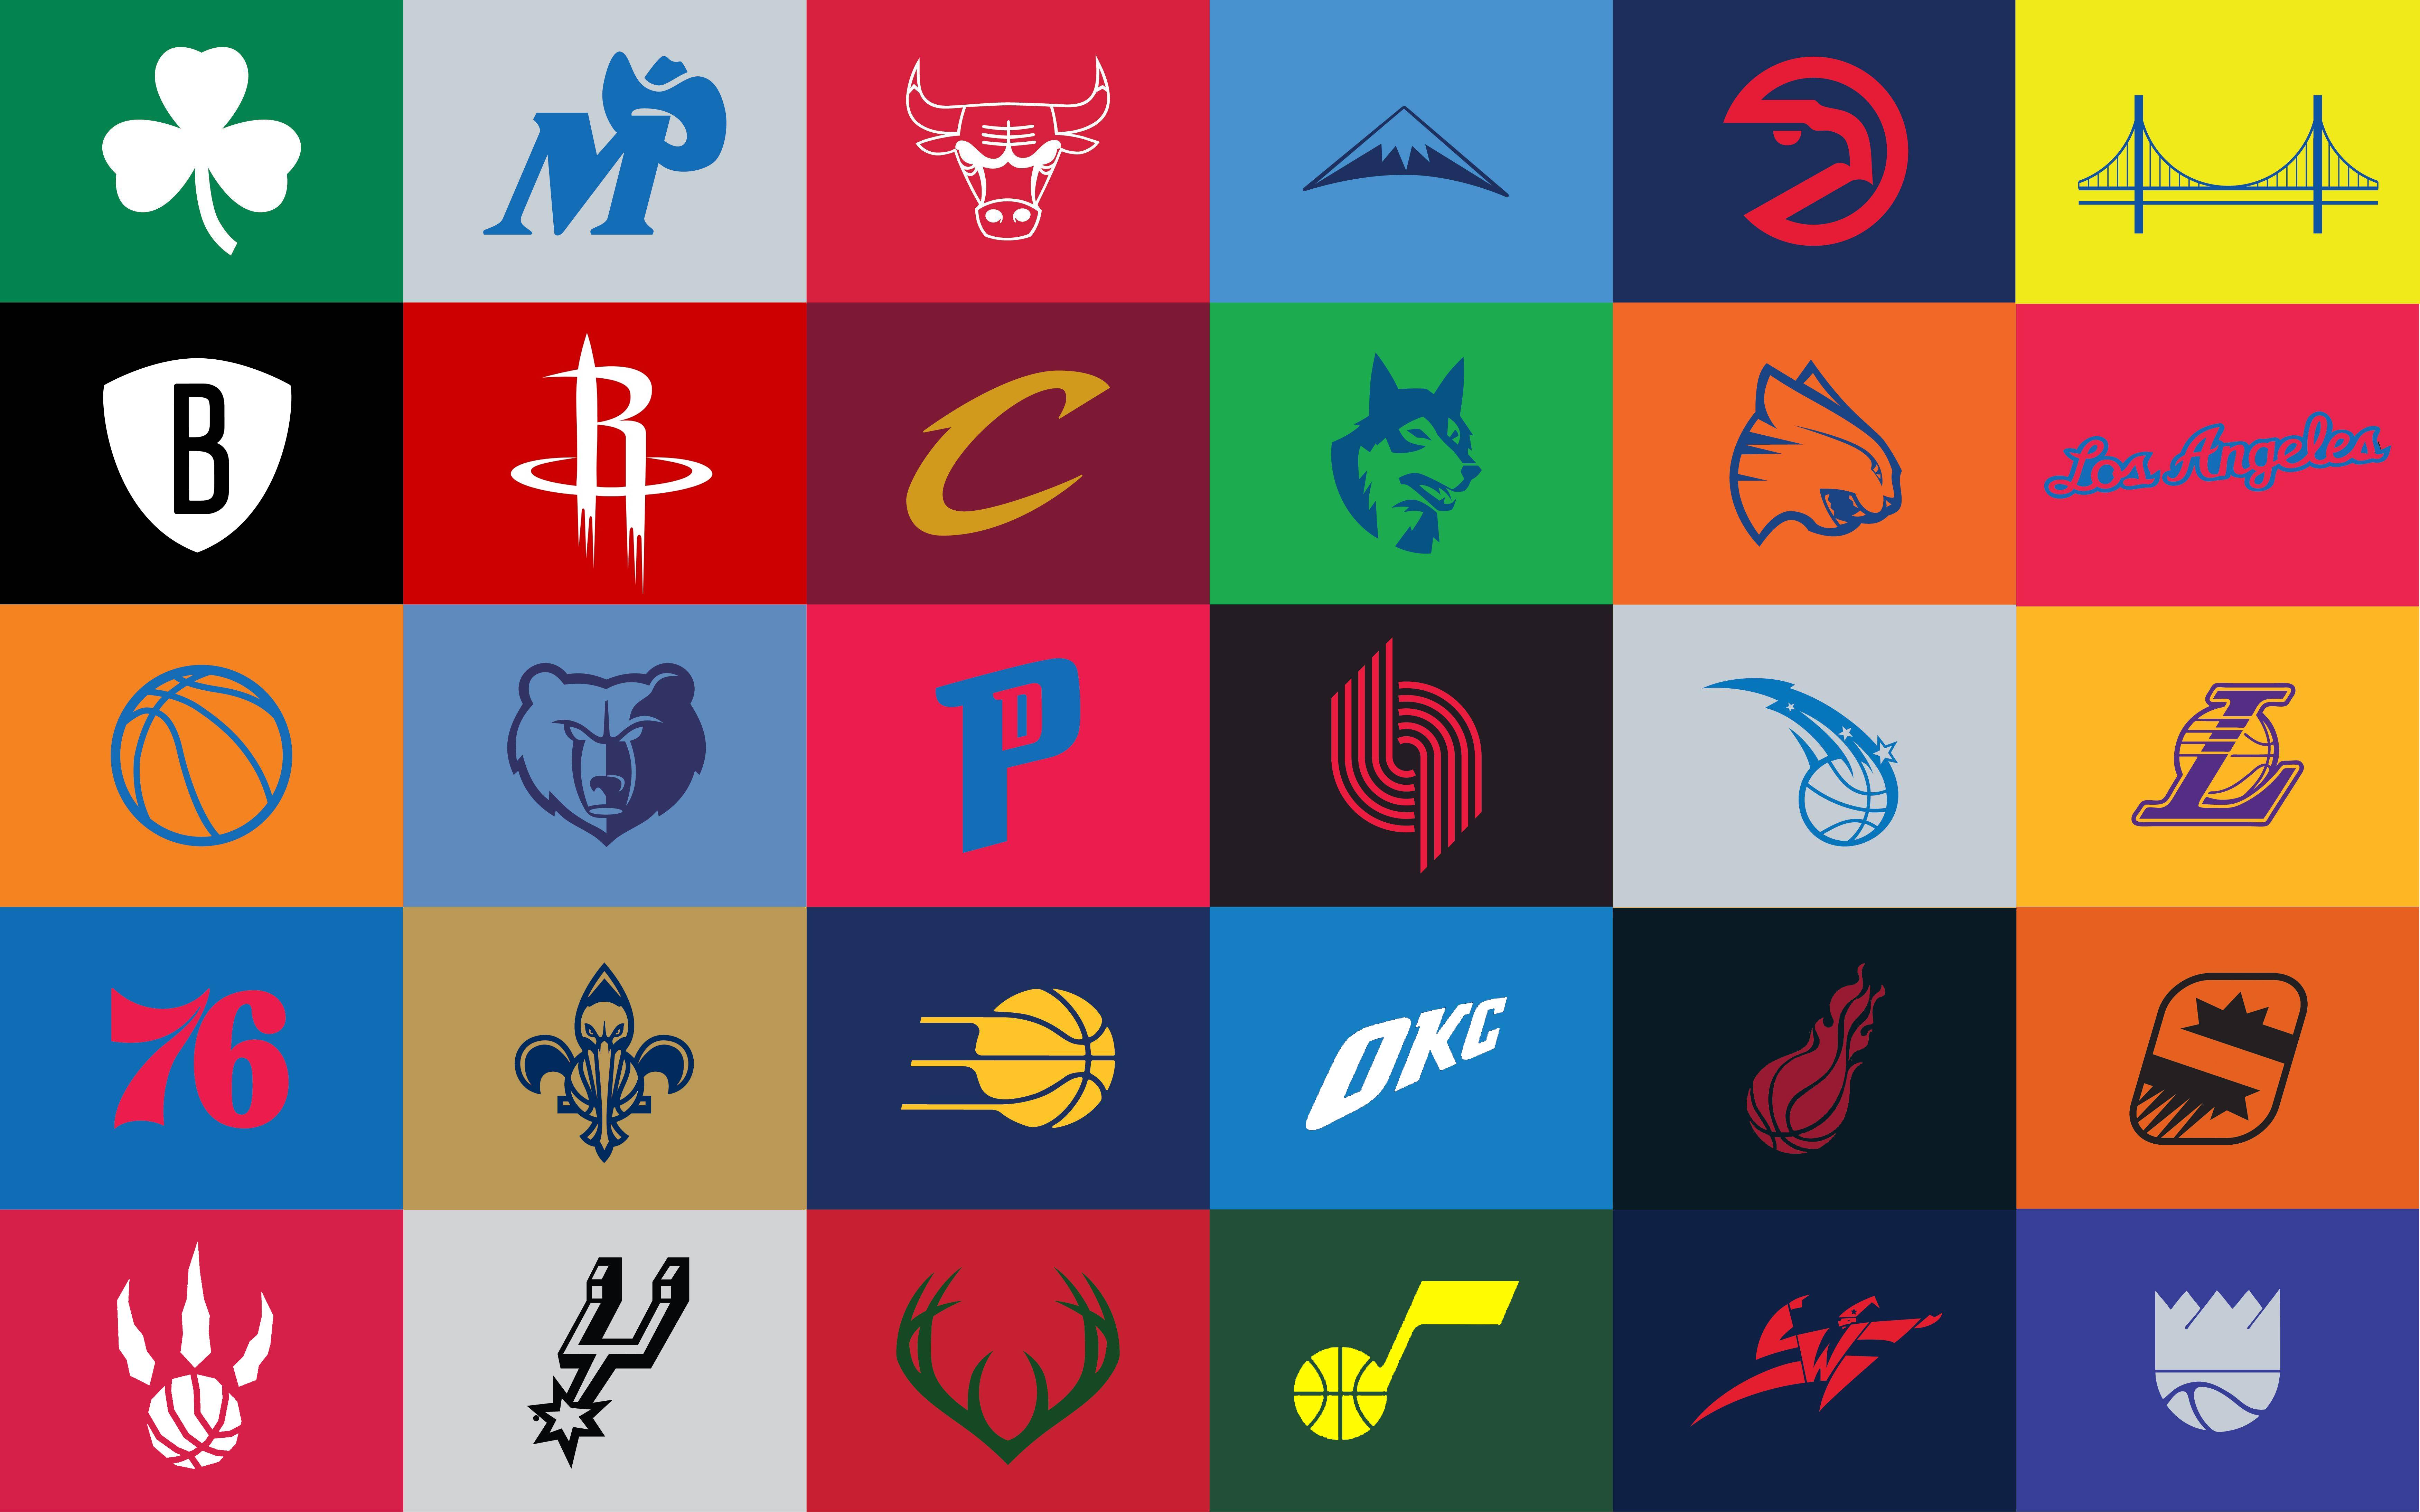 I Made A Few Adjustments To The Minimalist NBA Logos Wallpaper Made By U Dyoon19452 A Few Months Ago